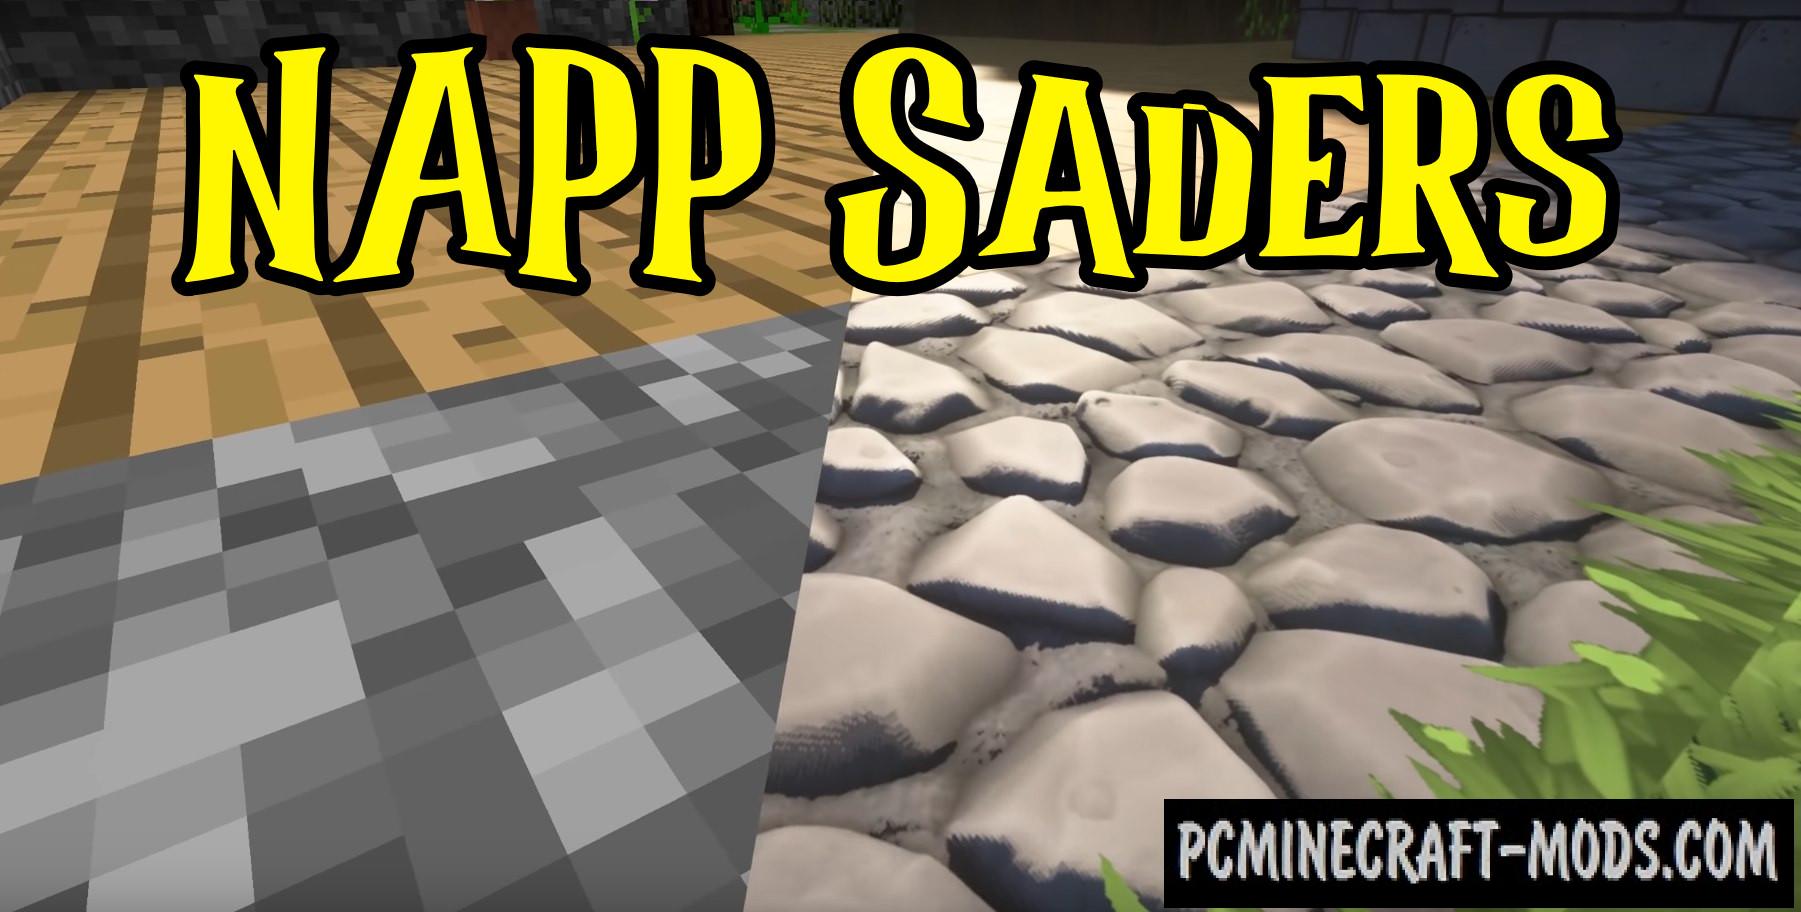 NAPP Shaders Pack For Minecraft 1.19.4, 1.19.3, 1.18.2